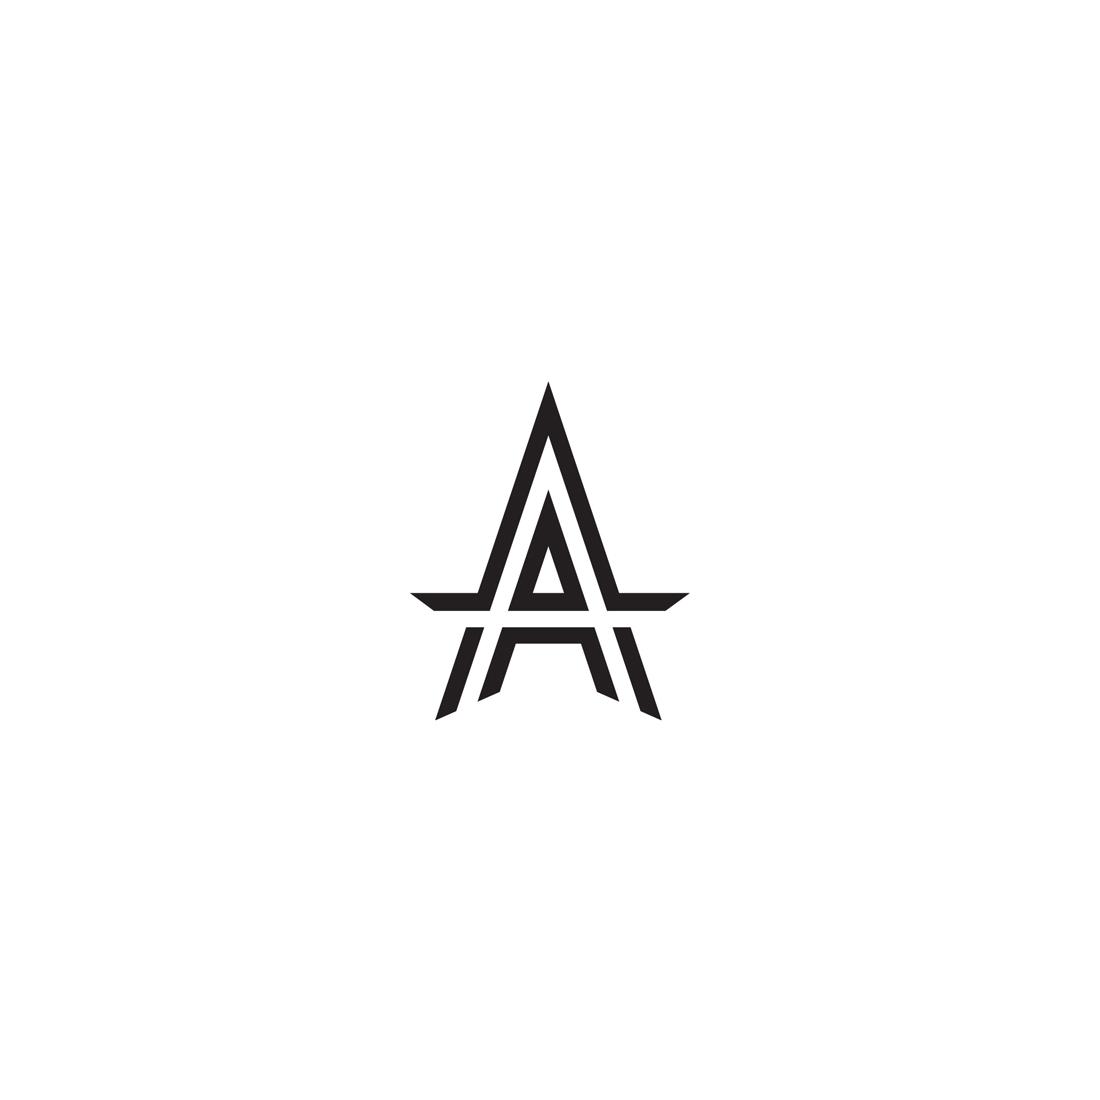 Black and white logo with the letter a.